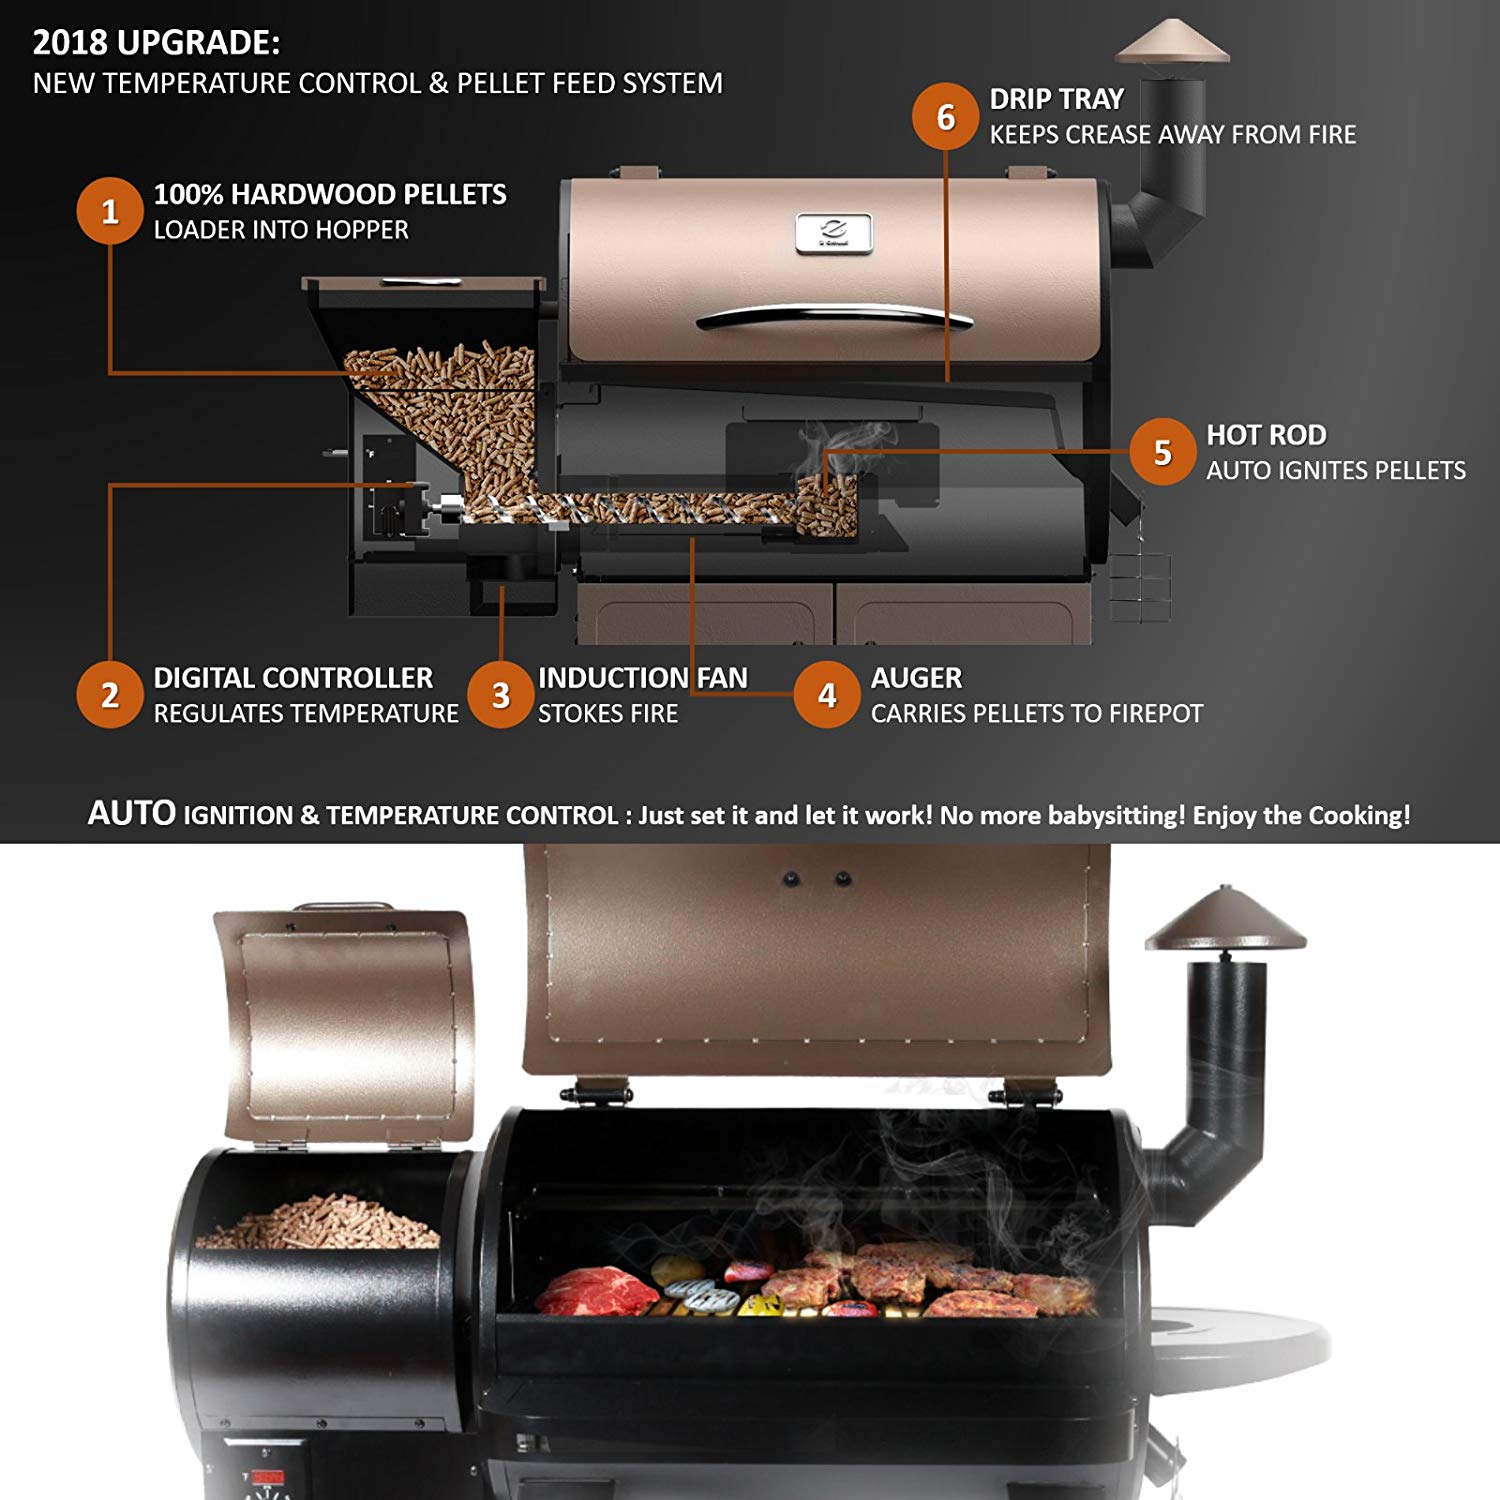 Z Grills ZPG-7002 Wood Pellet Grill & Smoker, 8 in 1 BBQ Grill Auto Temperature Control, 700 sq inch Cooking Area, Black - image 3 of 6